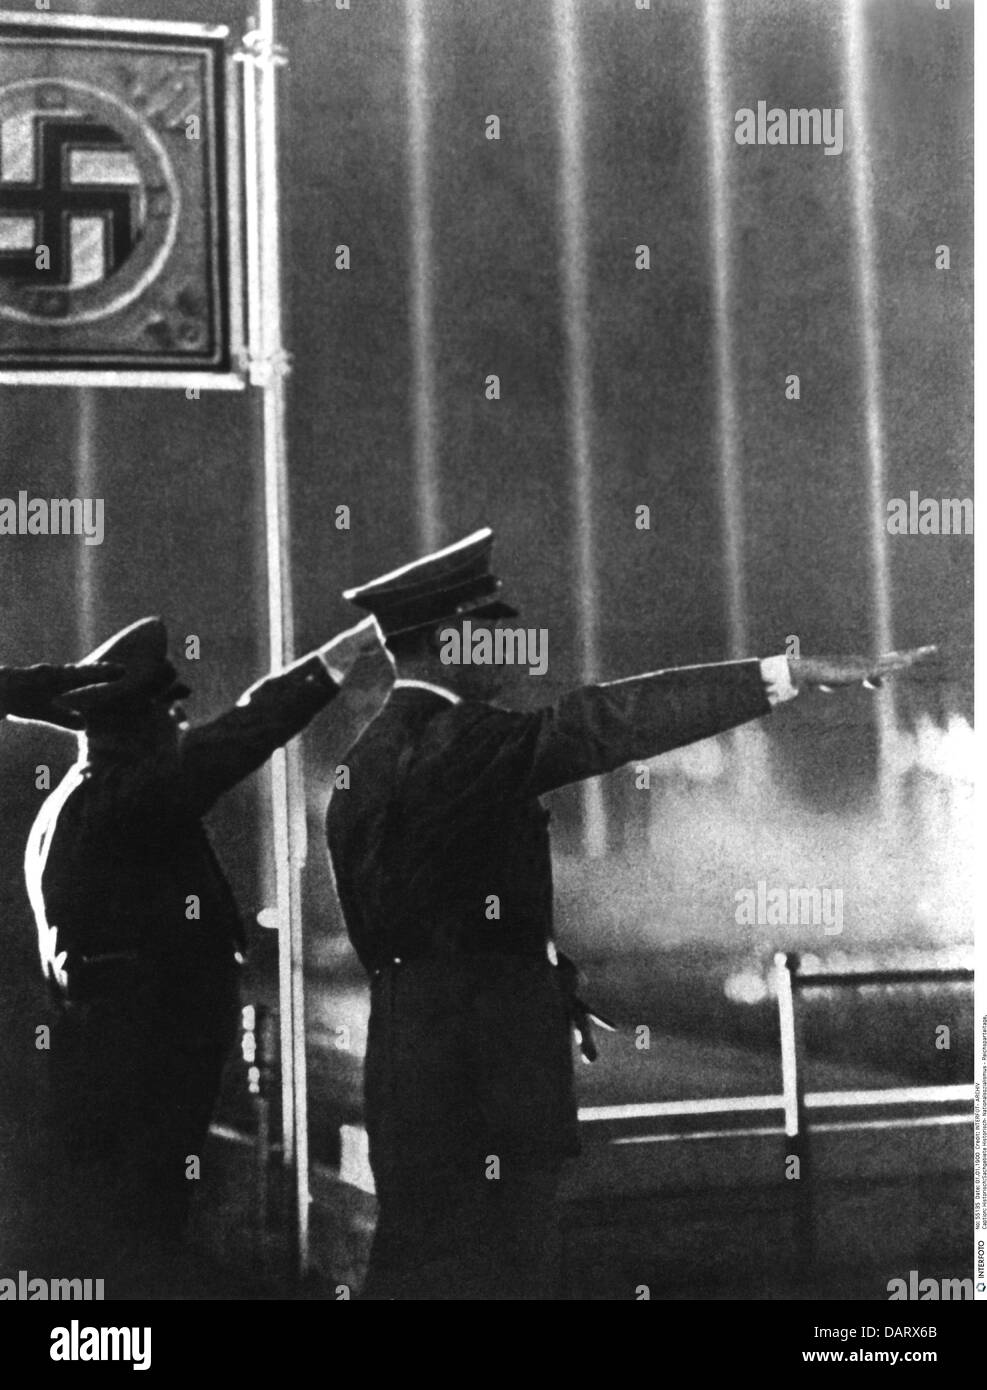 Nazism, National Socialism, Nuremberg Rallies, 'Reichsparteitag Grossdeutschland' (Rally of Greater Germany), 5. - 12.9.1938, Adolf Hitler saluting, Additional-Rights-Clearences-Not Available Stock Photo